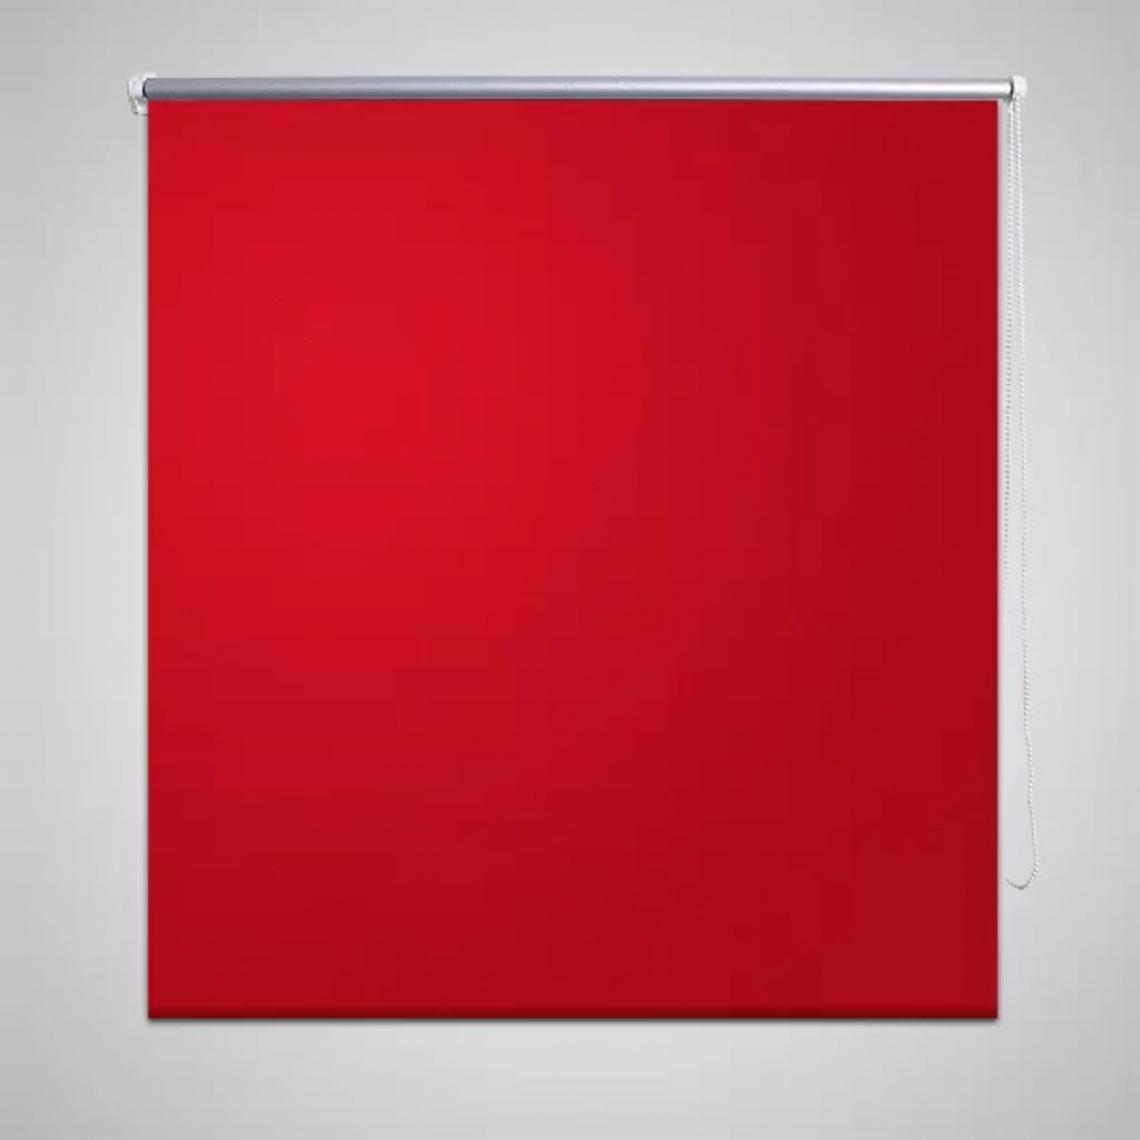 Chunhelife - Store enrouleur occultant 120 x 230 cm rouge - Store banne